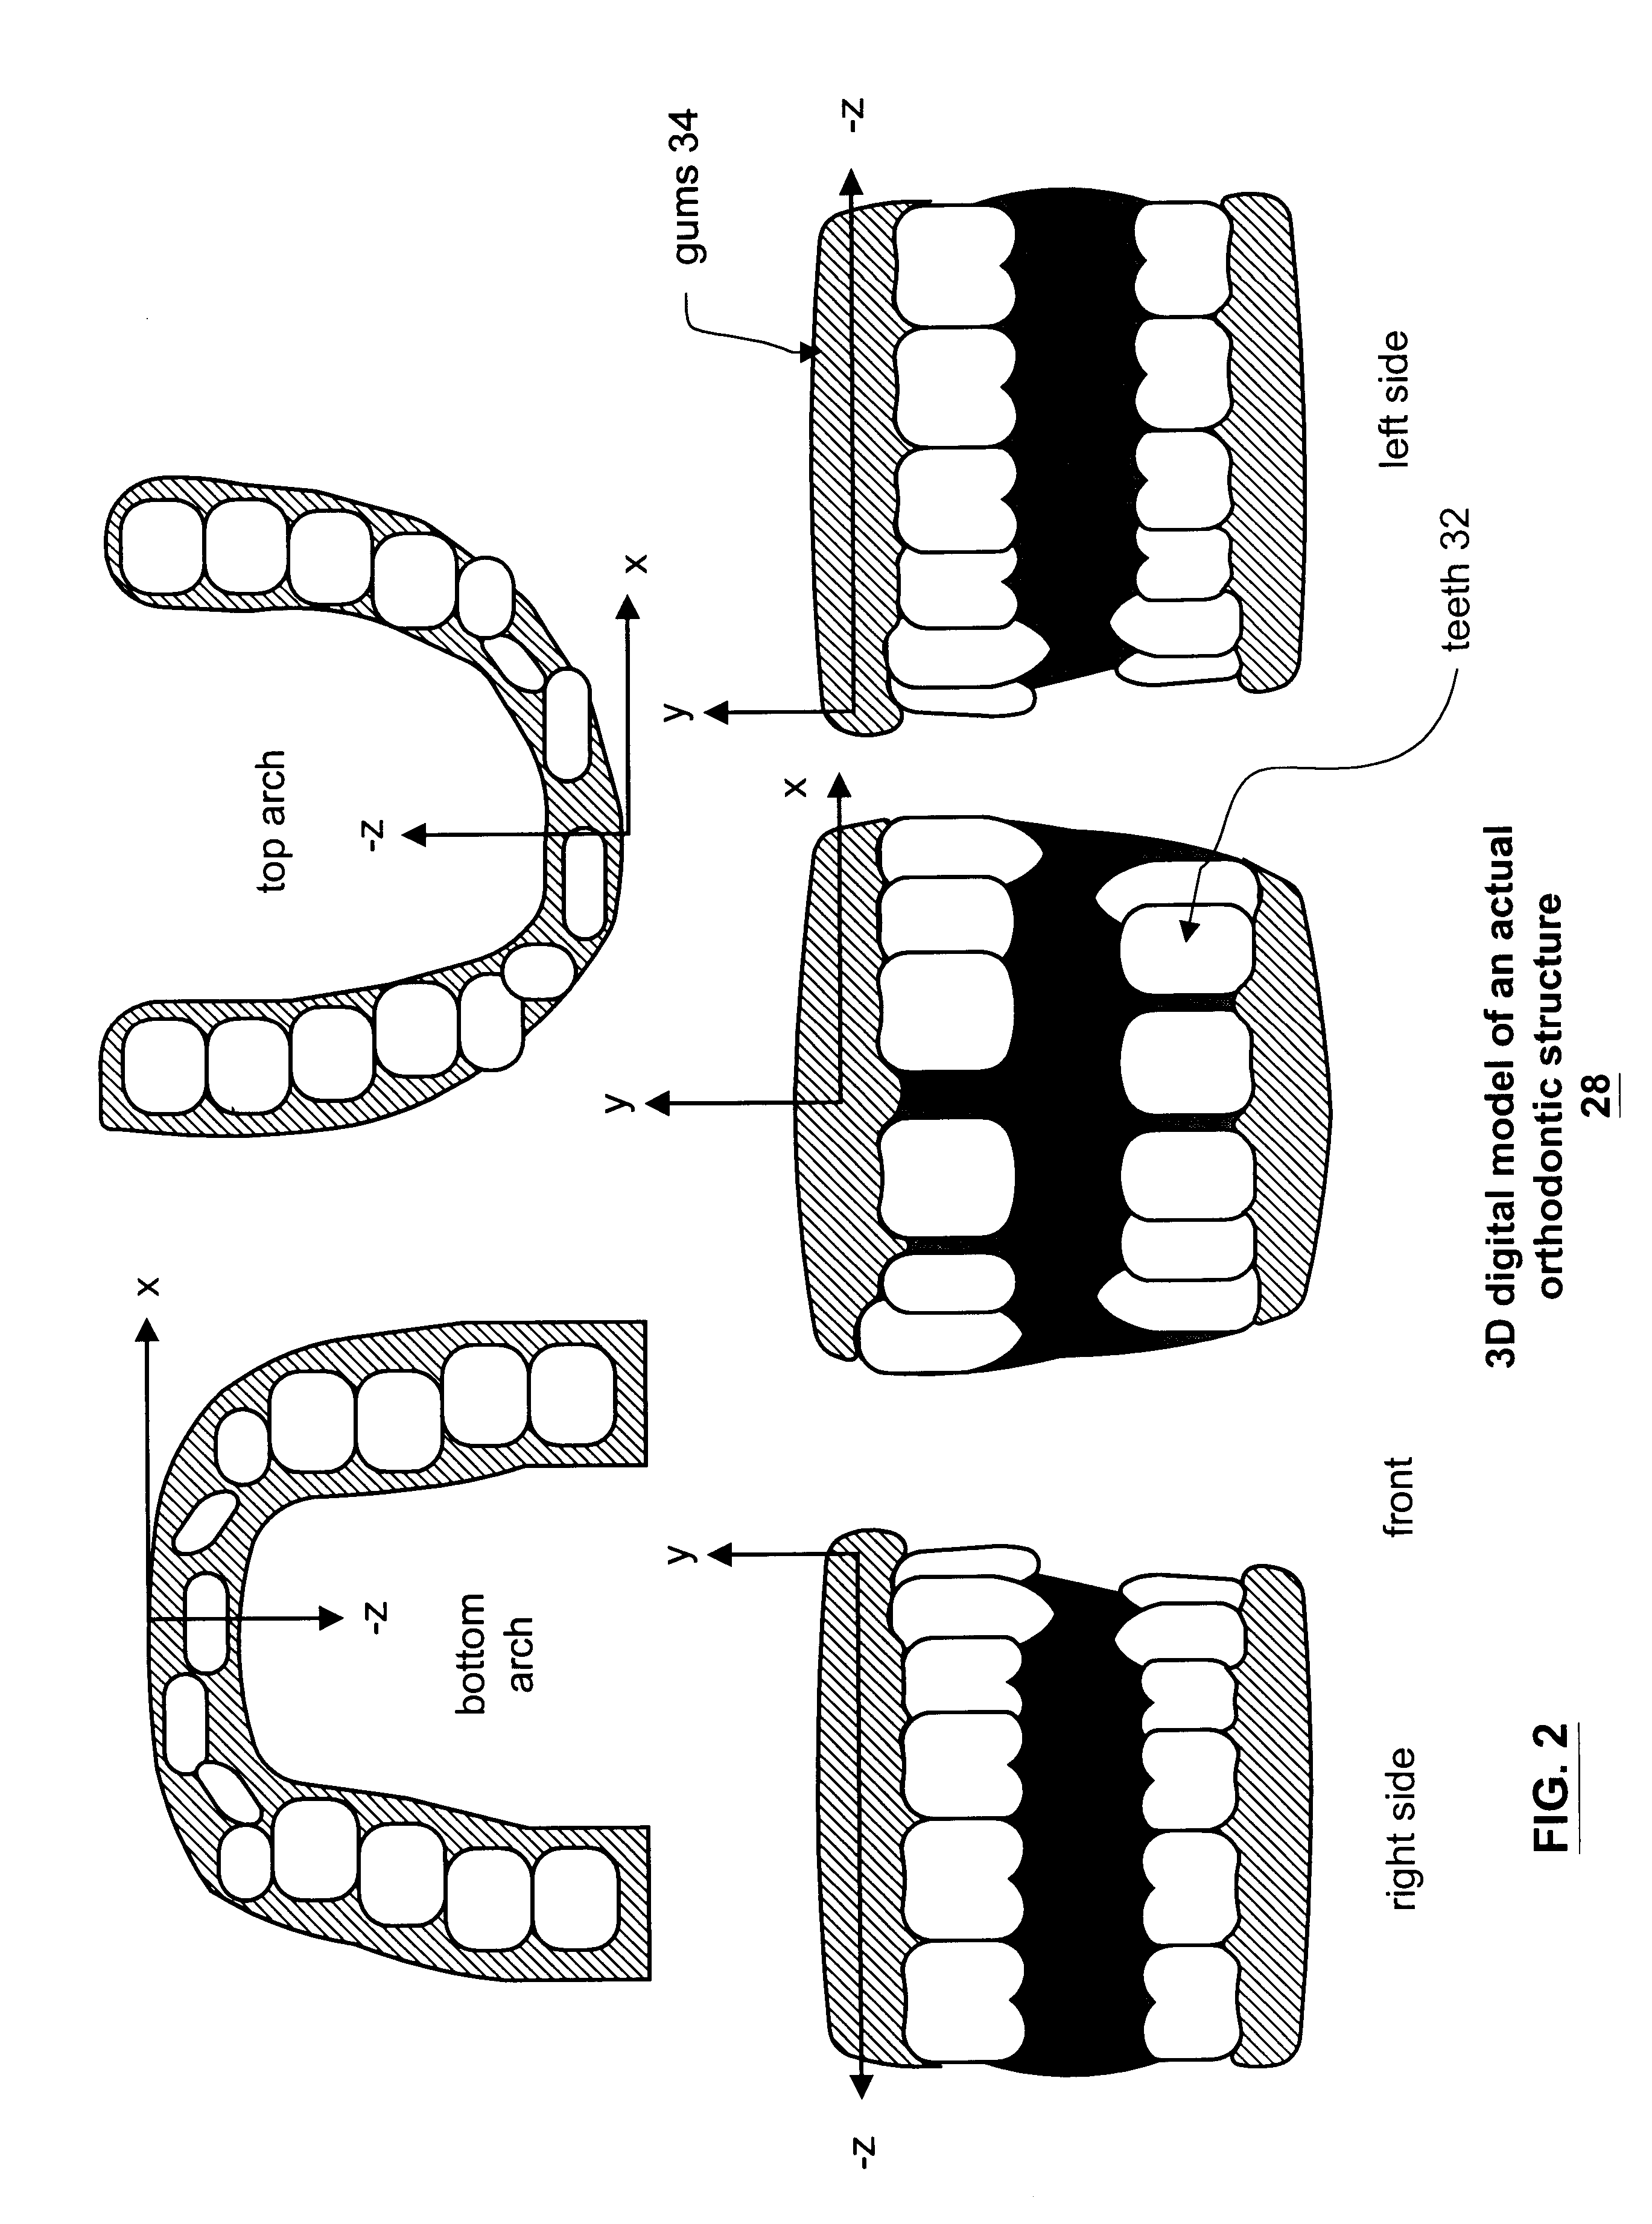 Method and apparatus for generating a desired three-dimensional digital model of an orthodontic structure